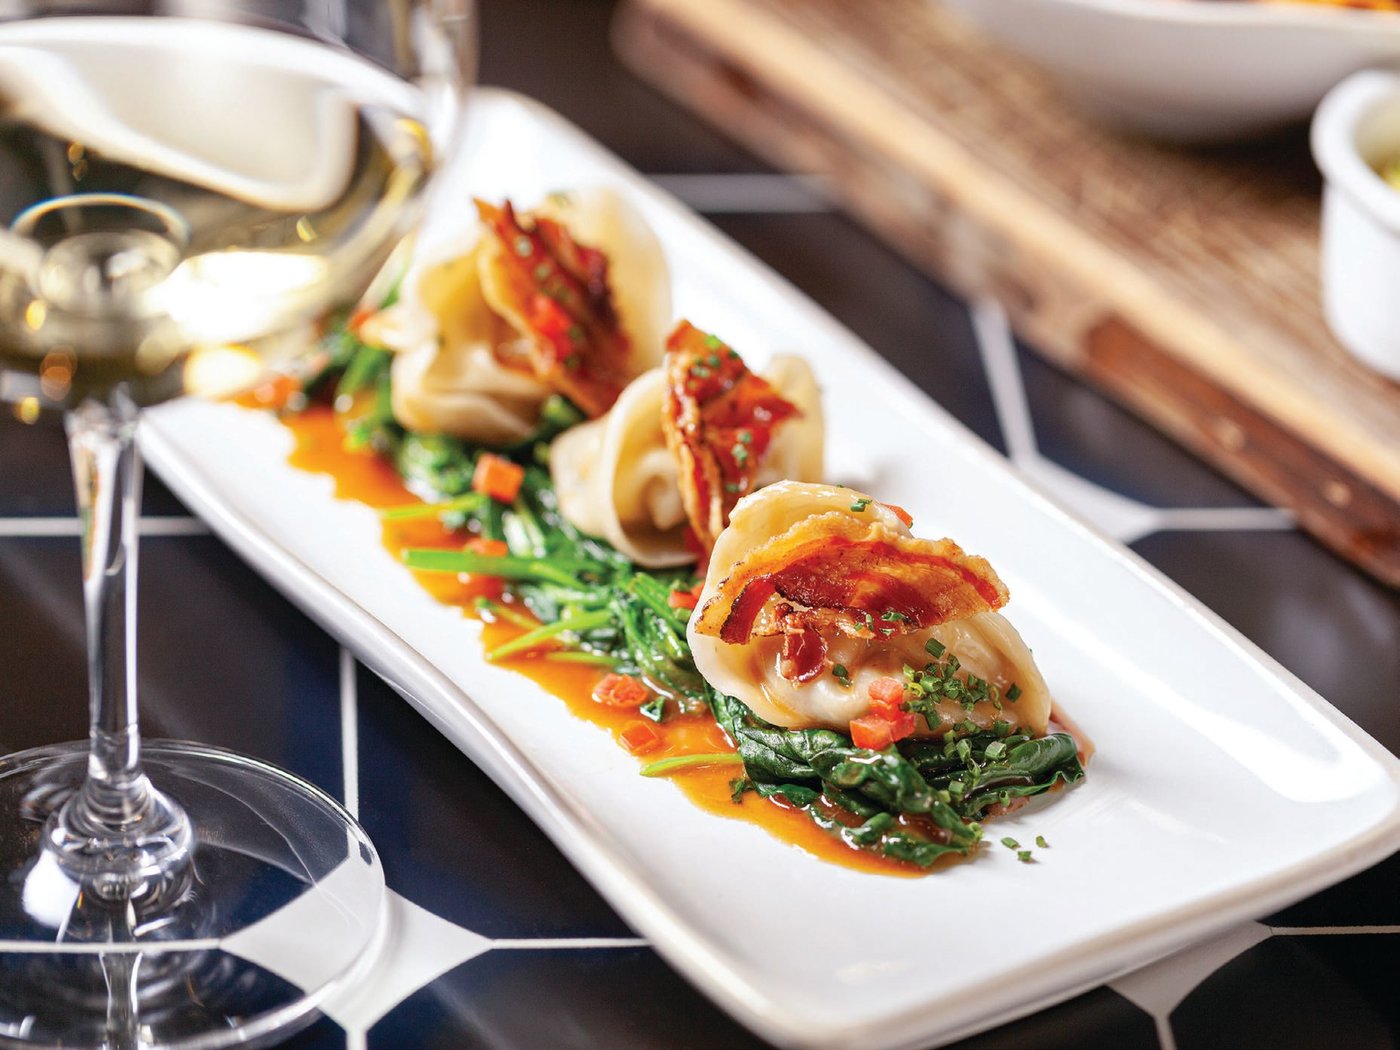 Pork belly pot stickers at the revitalized Willi’s Wine Bar PHOTO COURTESY OF THE BRANS